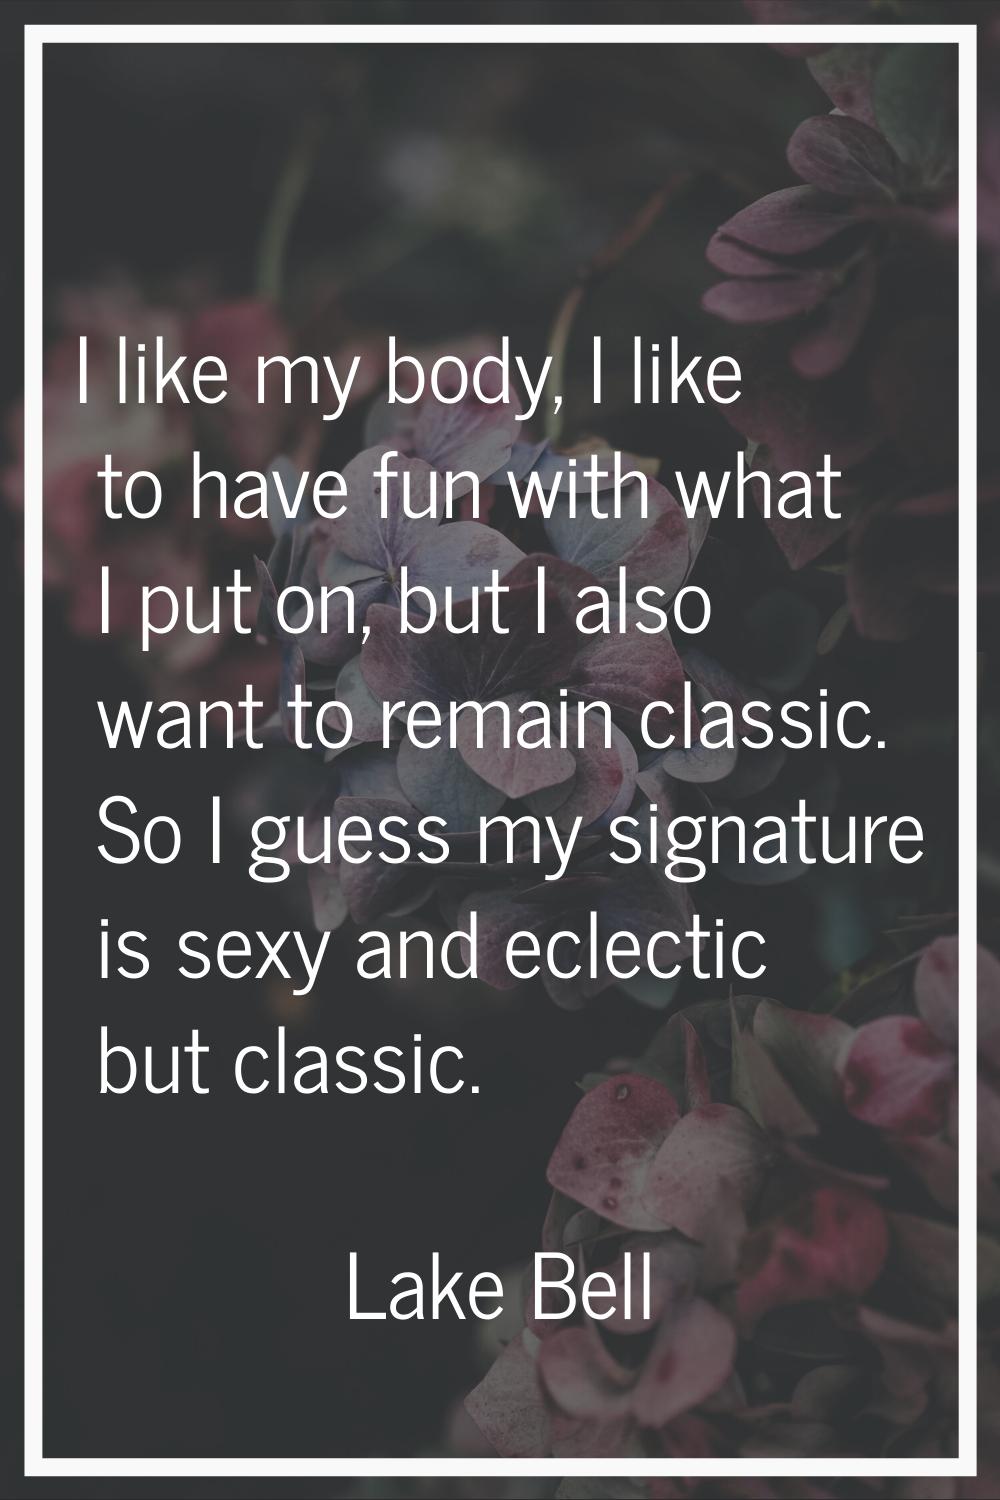 I like my body, I like to have fun with what I put on, but I also want to remain classic. So I gues